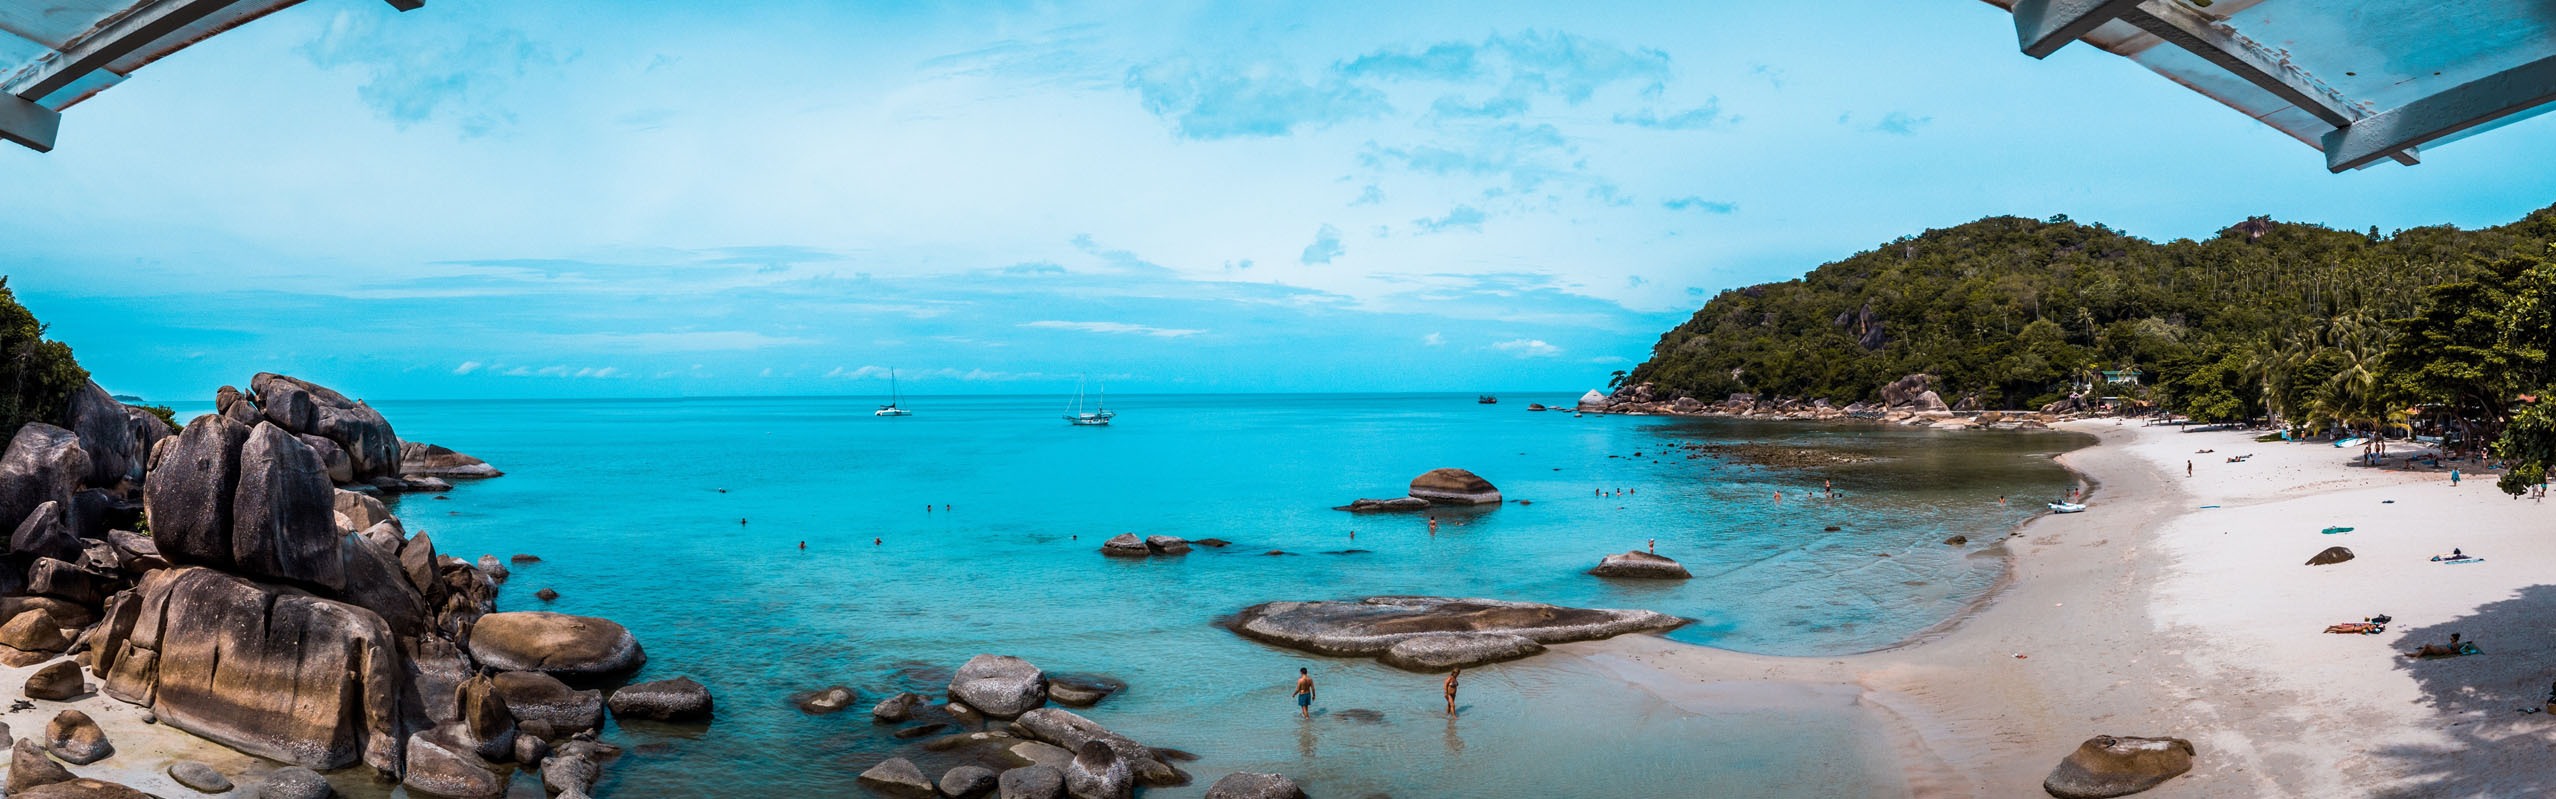 Phuket vs Koh Samui: Which Is Better to Go (An Honest Comparison for You)